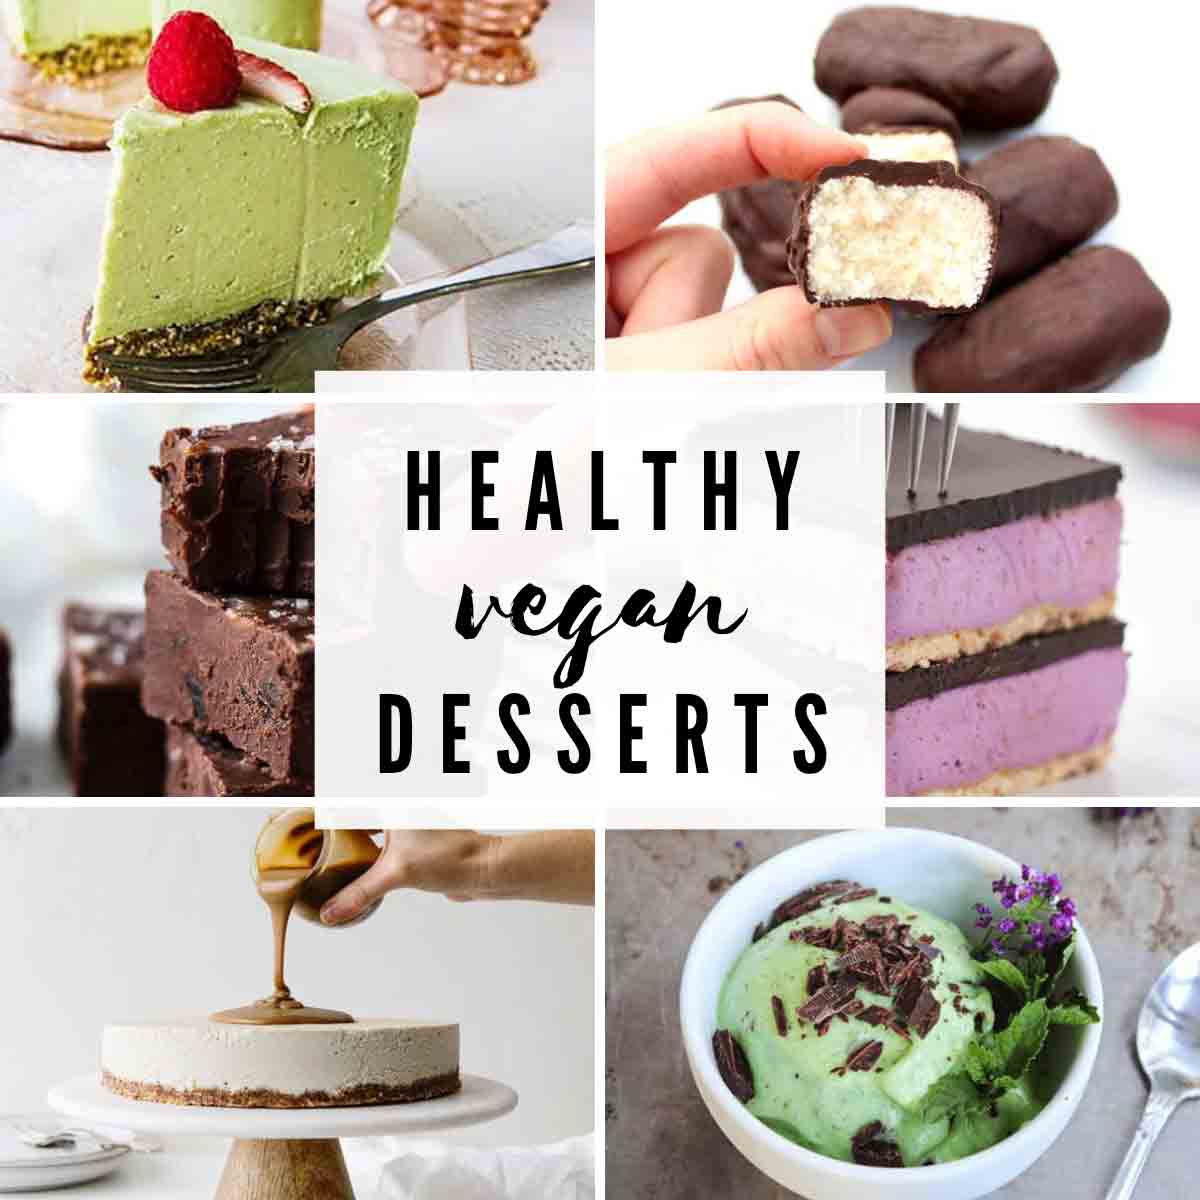 6 Images Of Healthy dairy-free Desserts